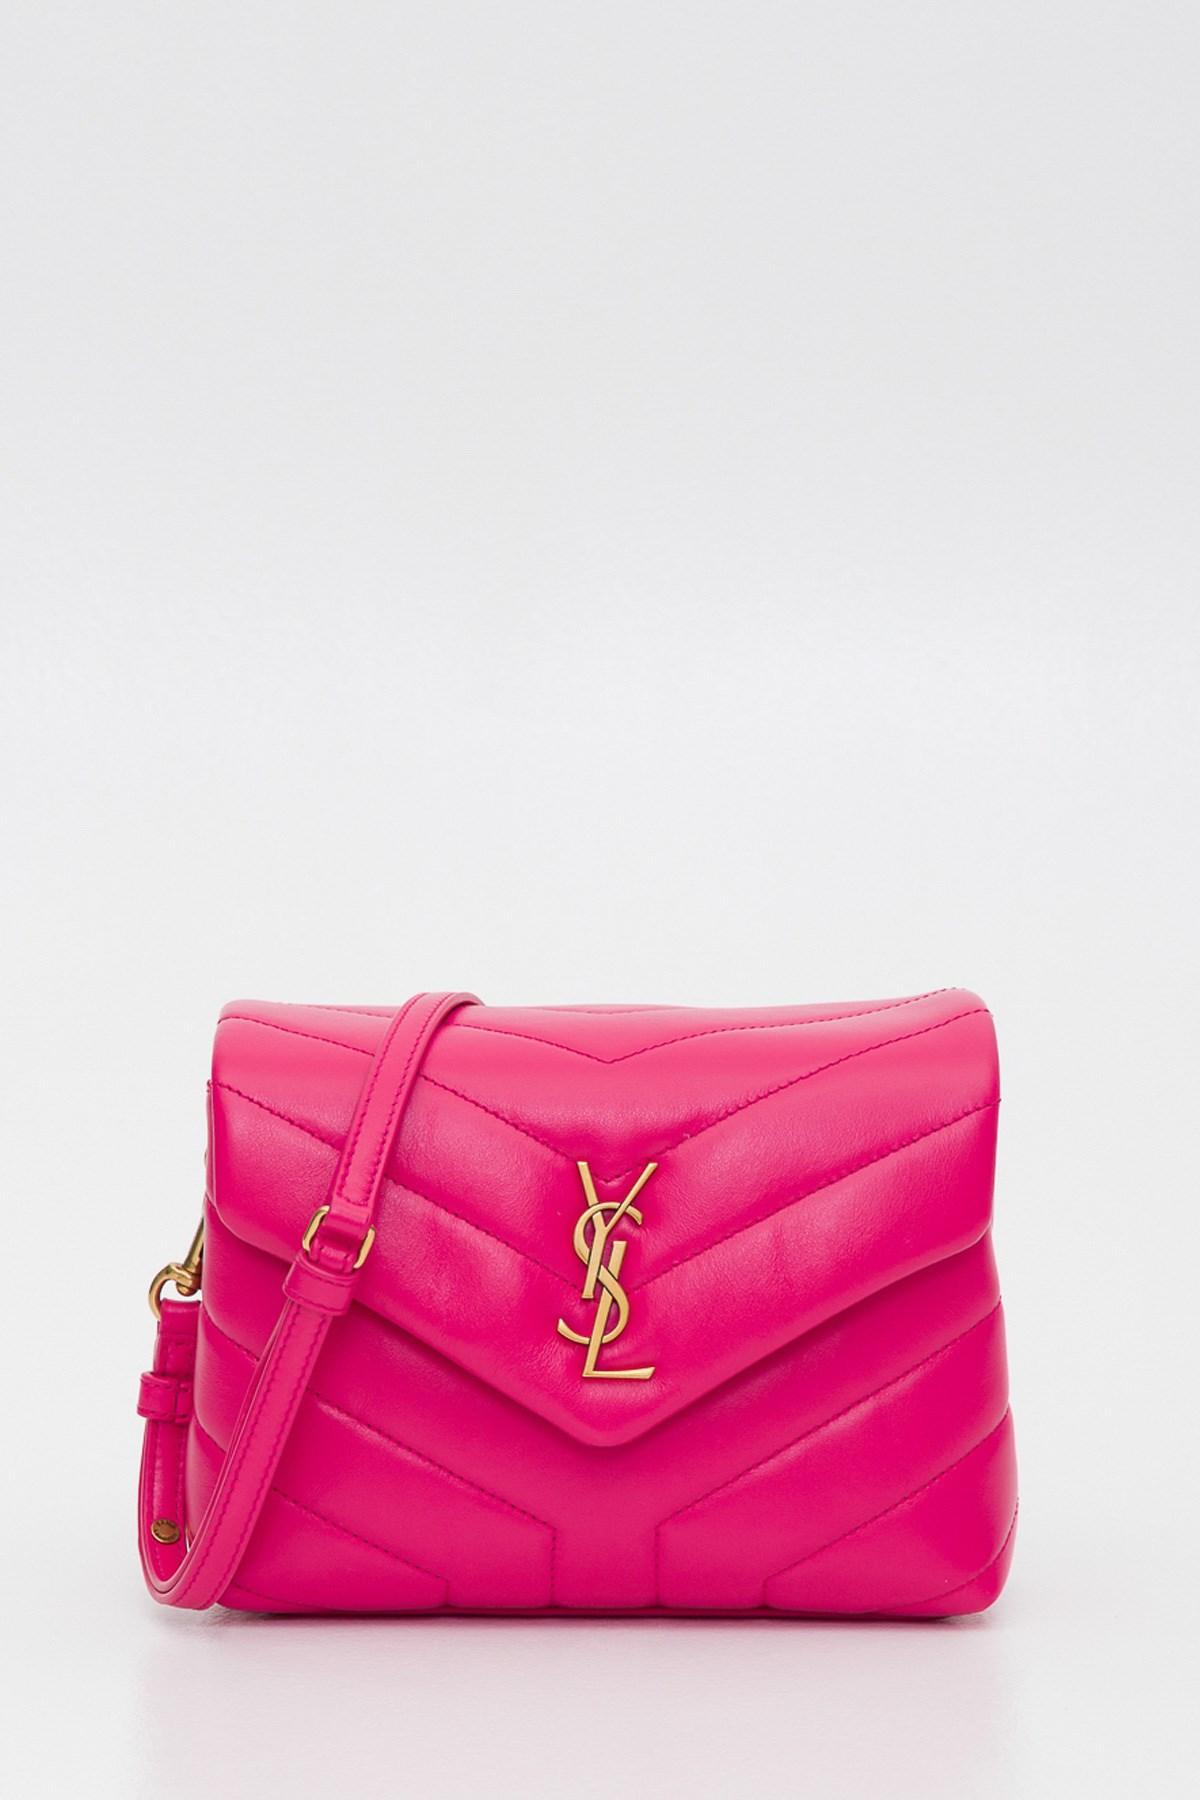 Saint Laurent Leather Loulou Toy Bag in Pink - Lyst